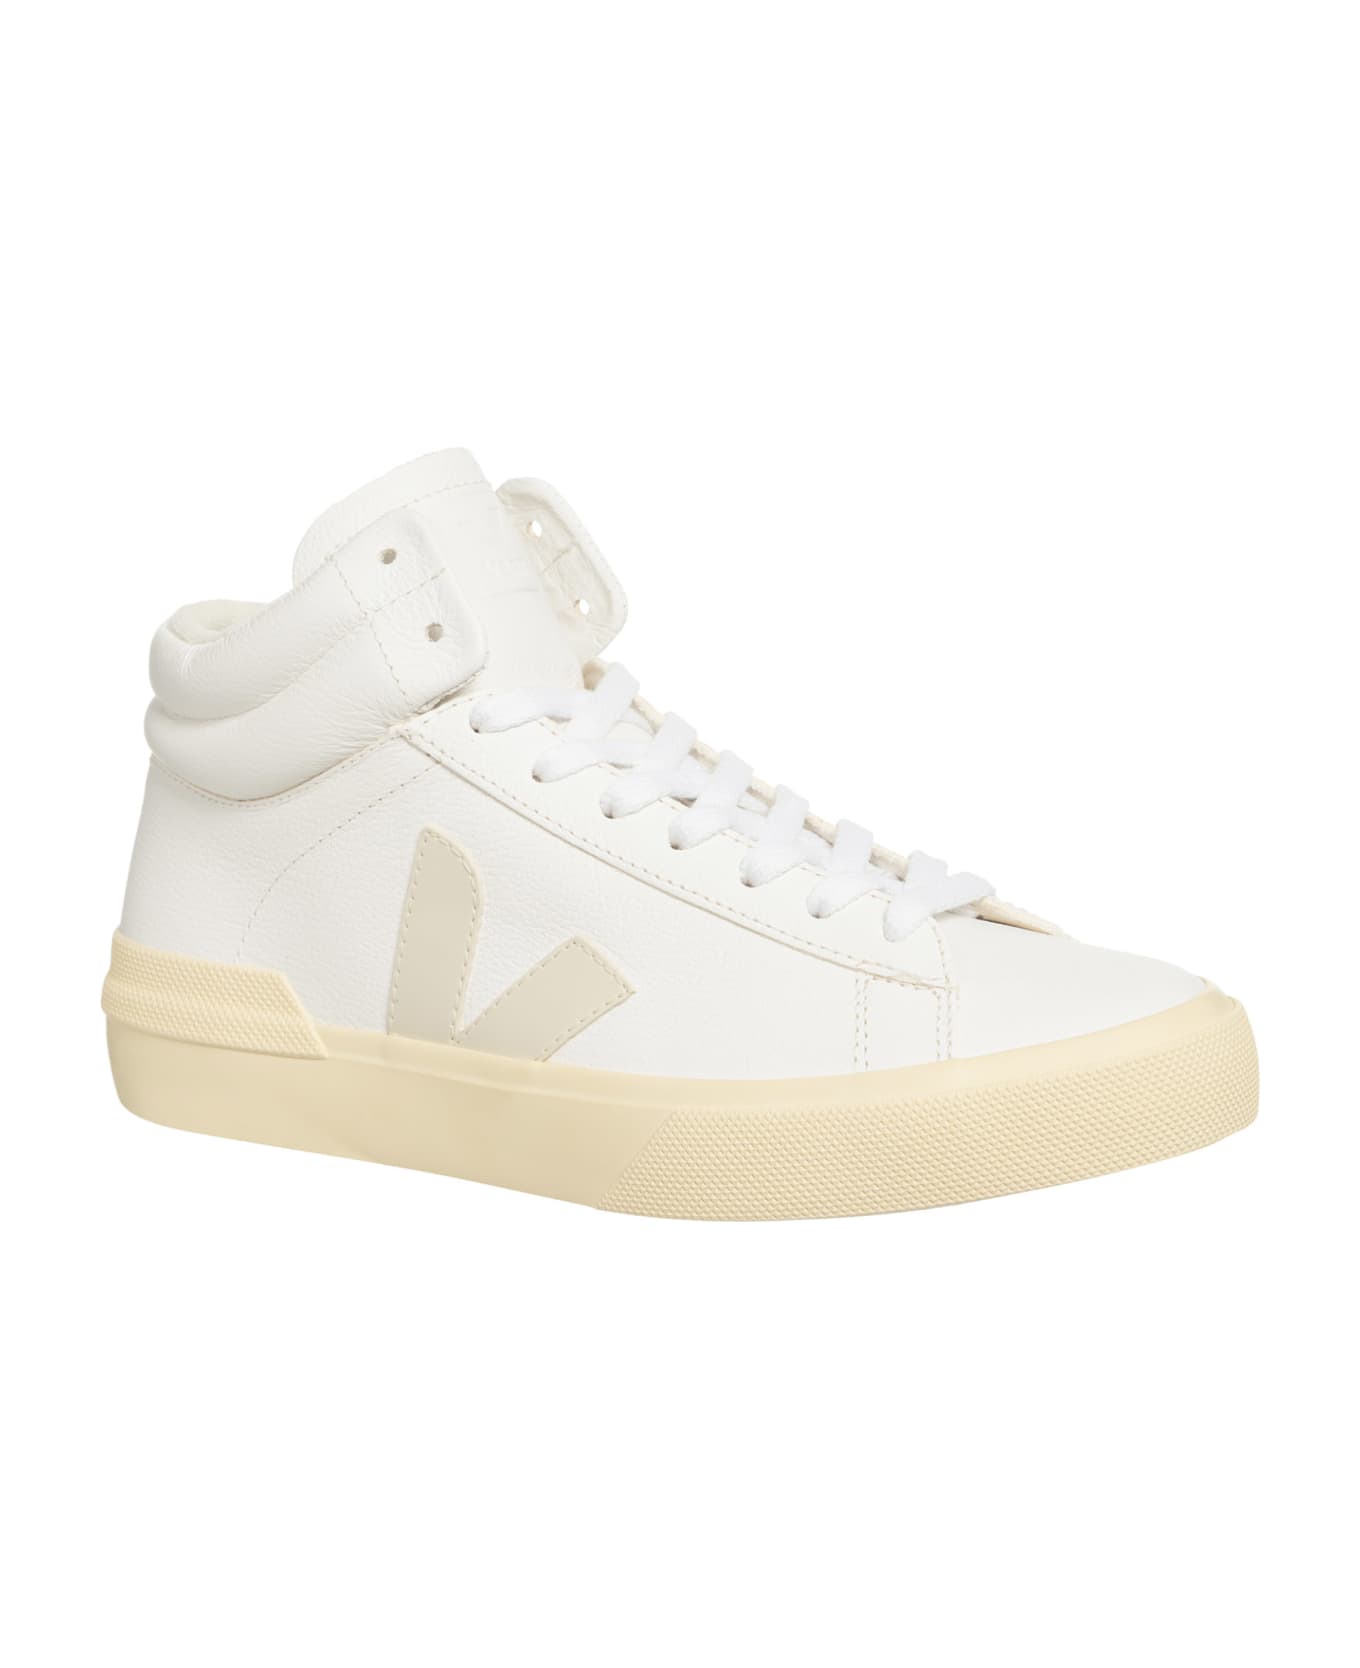 Veja Minotaur Leather High-top Sneakers - White